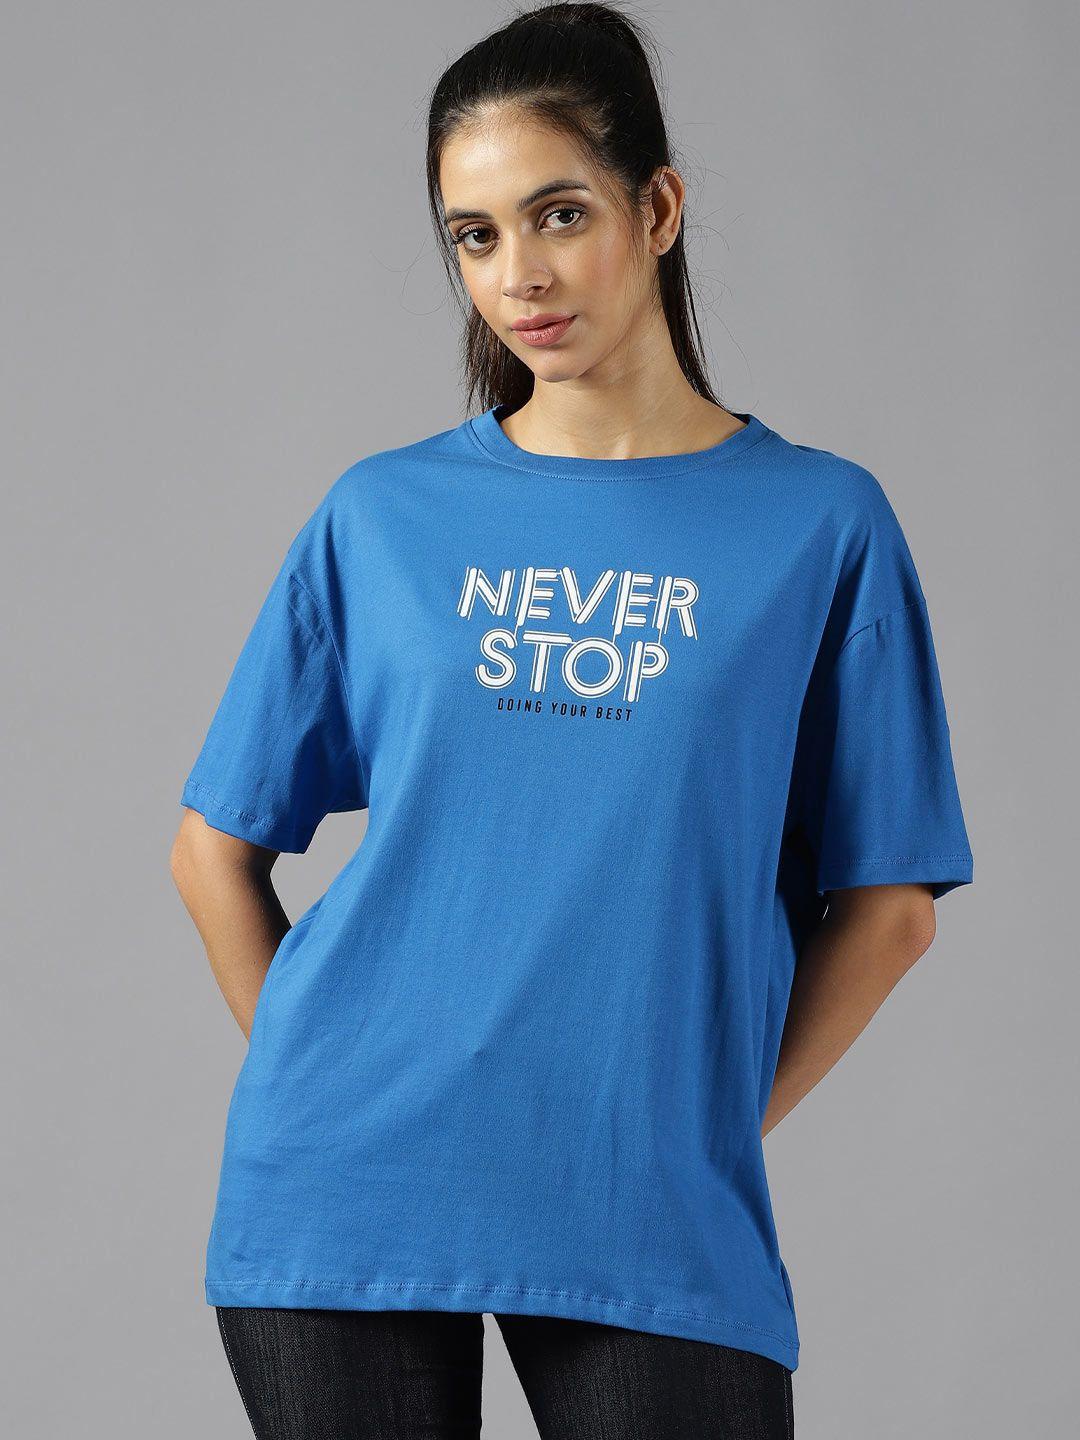 the-roadster-lifestyle-co.-blue-typography-printed-pure-cotton-oversized-t-shirt